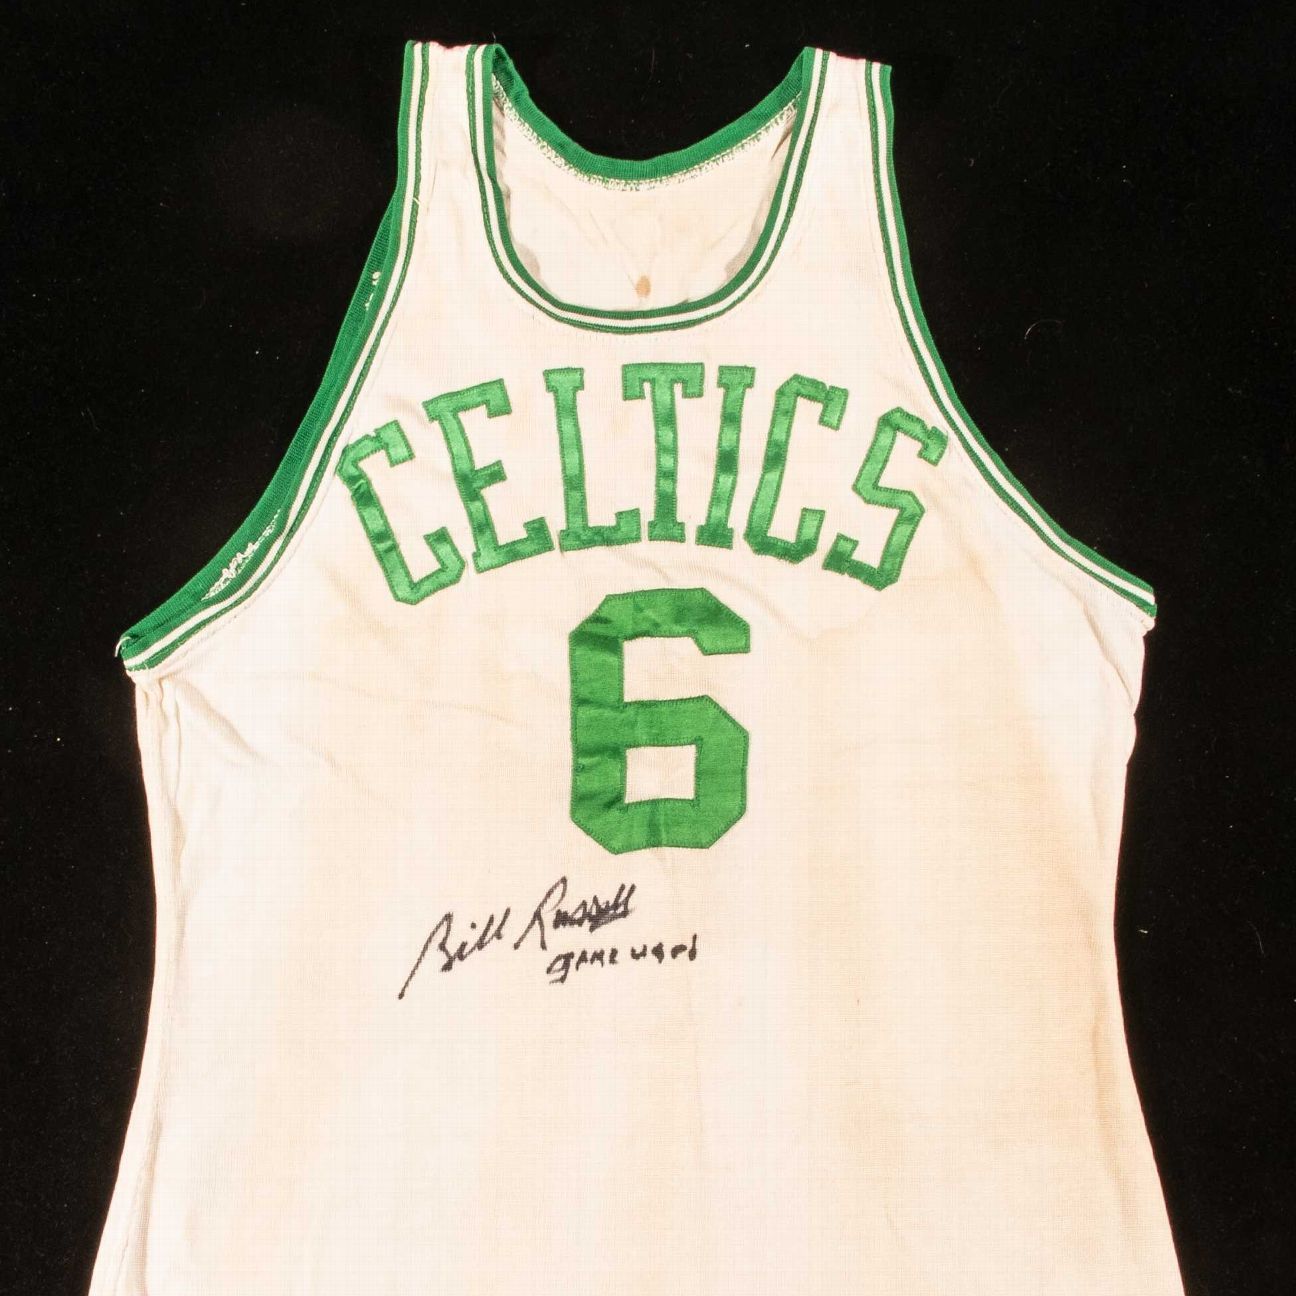 Weiss] The Celtics revealed their Bill Russell city edition jerseys today.  They will honor the late Russell at tomorrow's season opener with a Russell  tribute game featuring performances throughout the night from